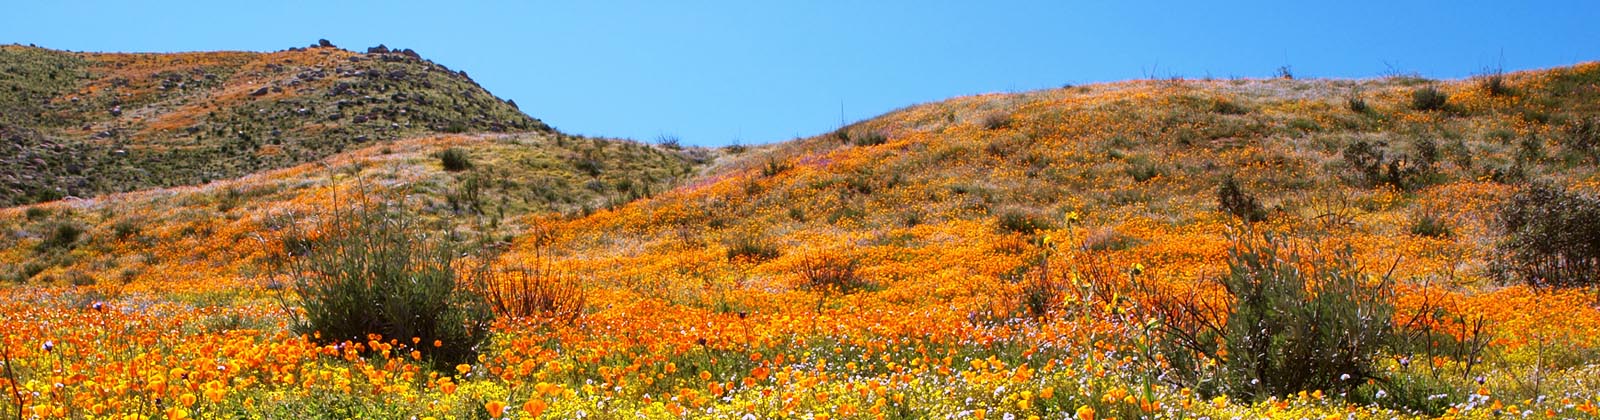 Dig in! Plant Wildflowers with the Native Seed Farm